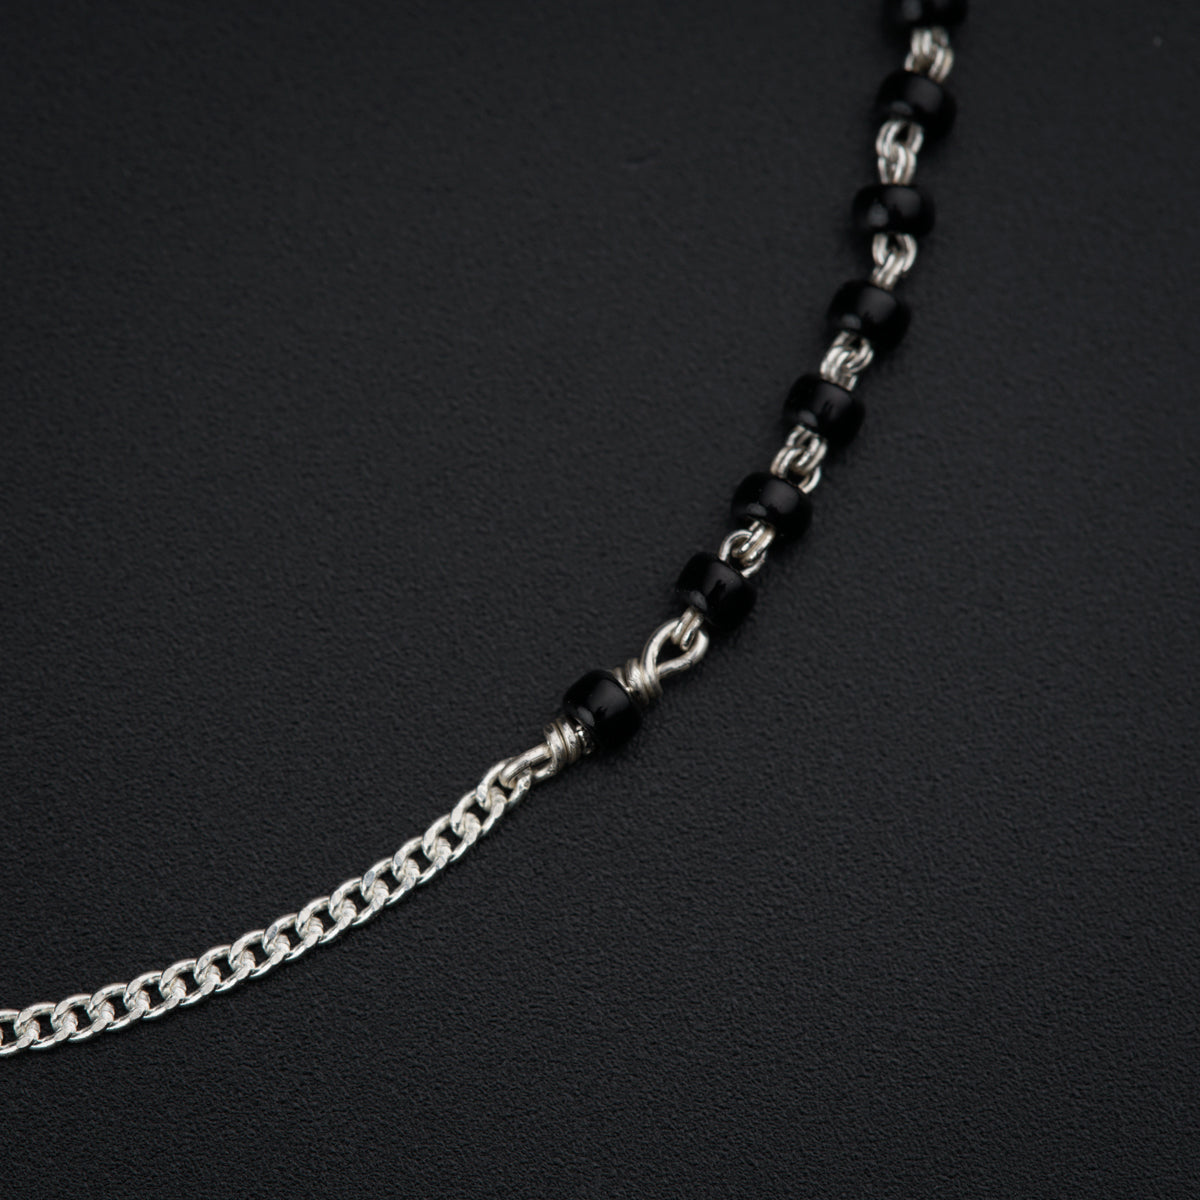 a black and silver chain is on a black surface